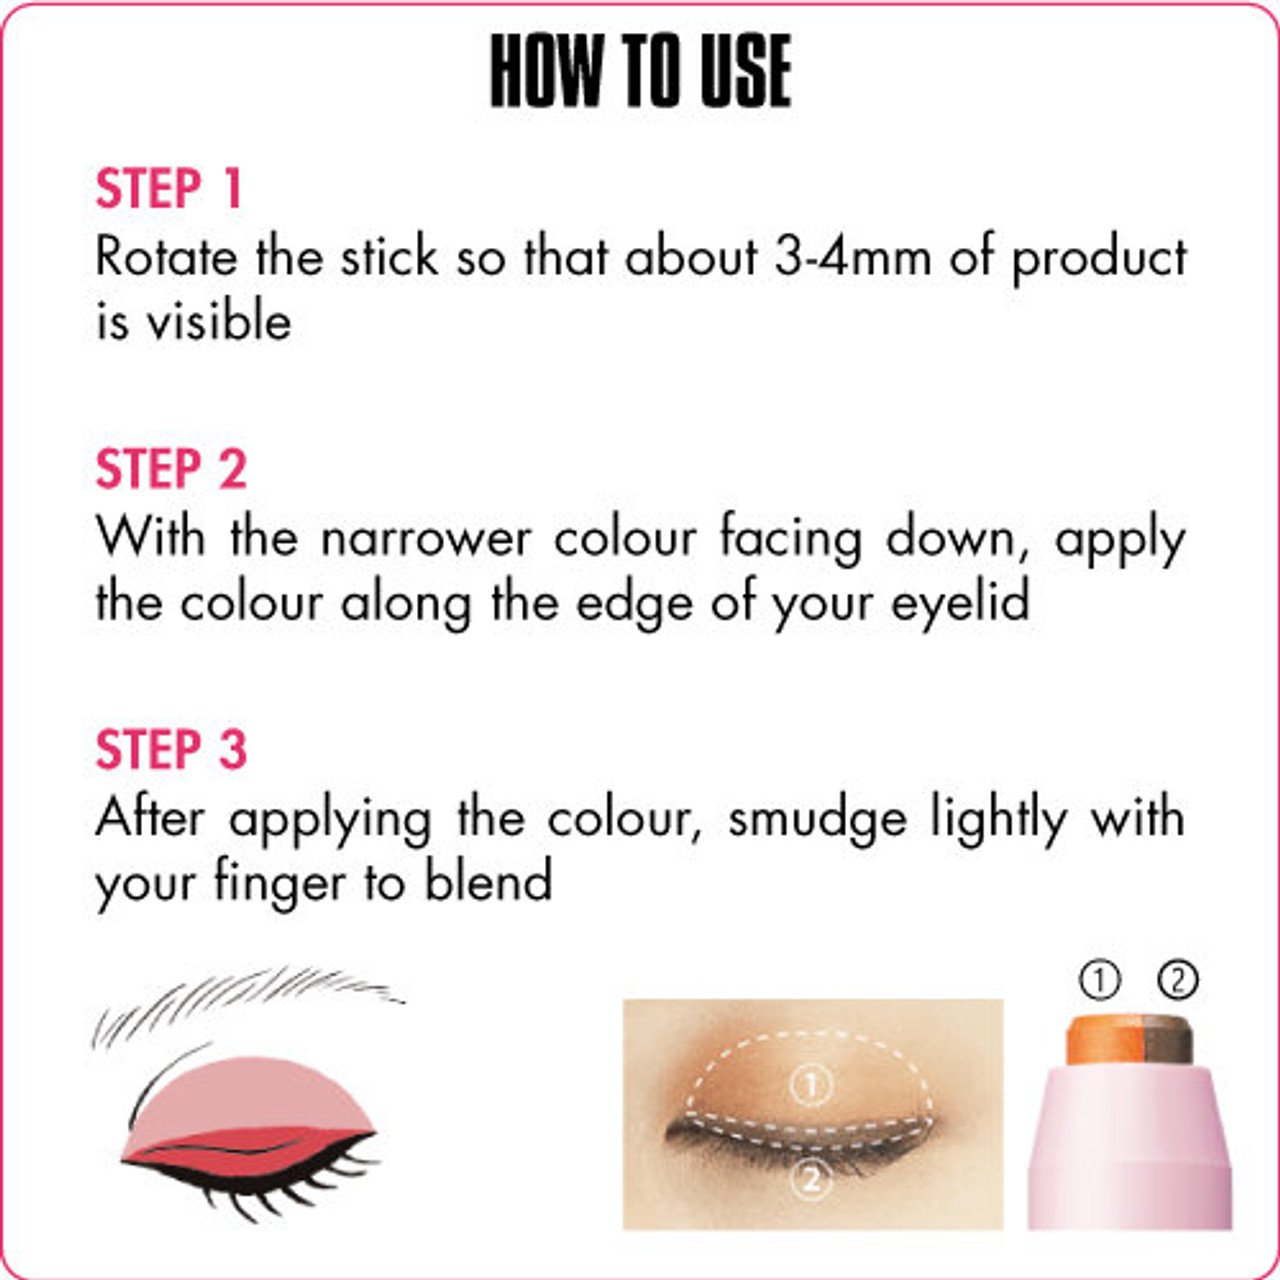 A graphic describing how to use Dual Colour Stick. Text reads: HOW TO USE
Step 1 Rotate the stick so that about 3-4mm of product is visible. Step 2 With the narrower colour facing down, apply the colour along the edge of your eyelid. Step 3 After applying the colour, smudge lightly with your finger to blend.